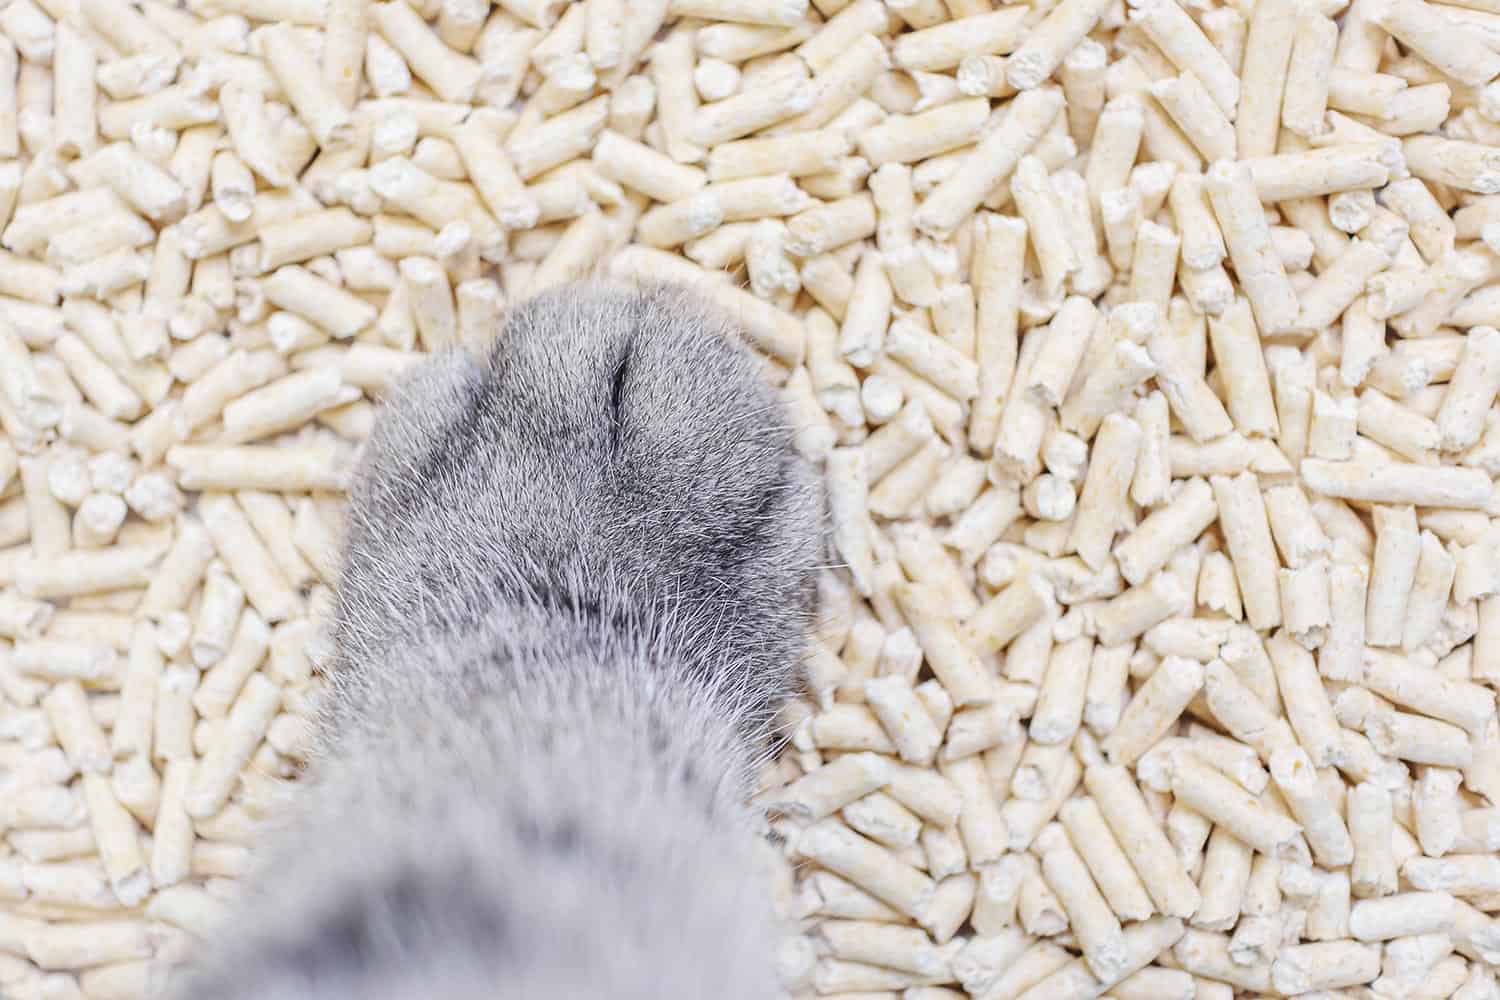 Natural eco-friendly cat litter and cat's paw